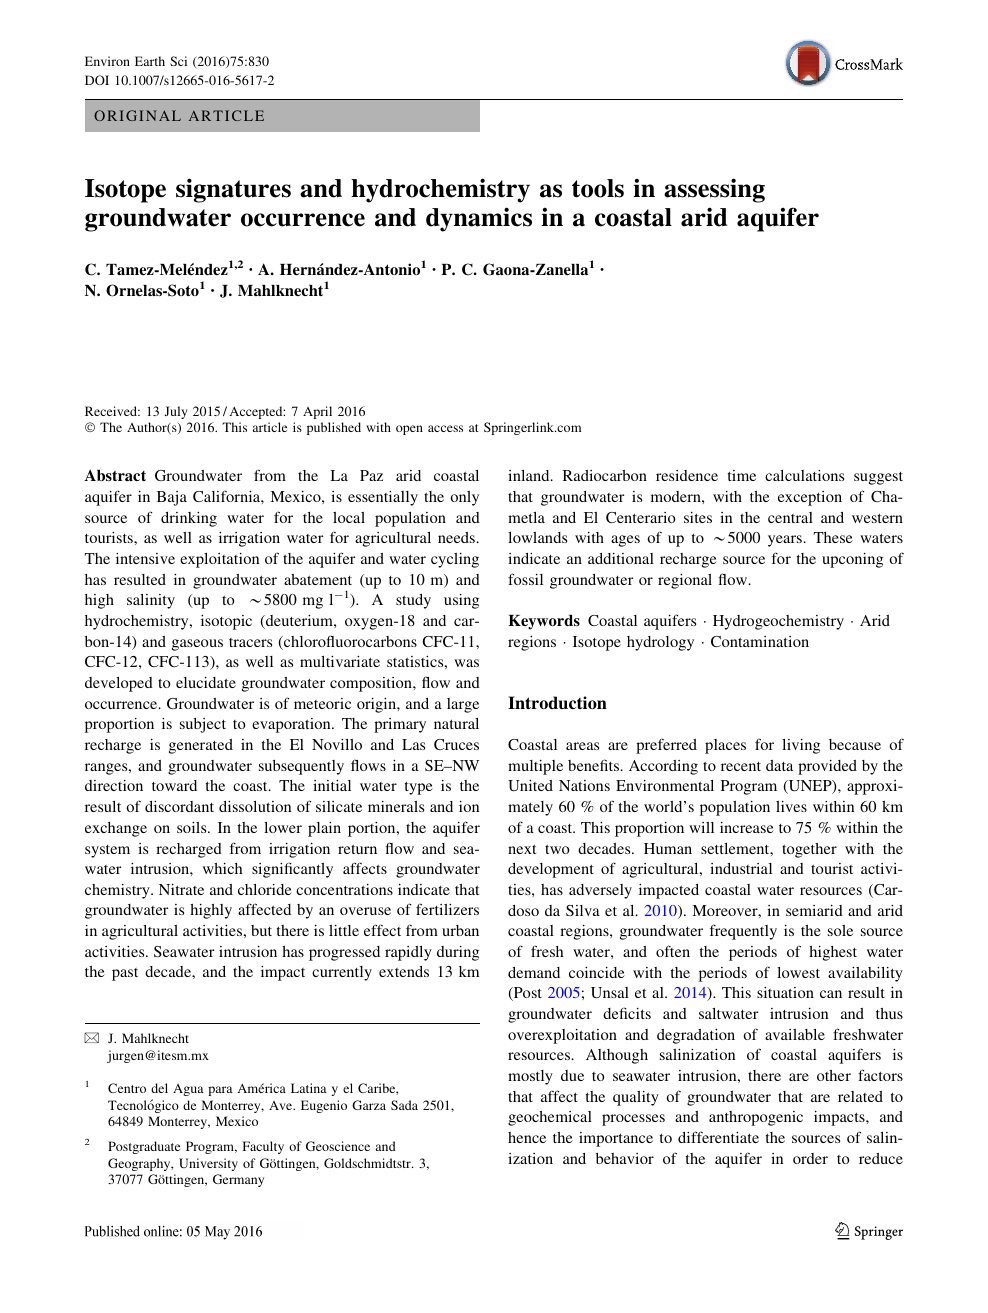 Isotope Signatures And Hydrochemistry As Tools In Assessing